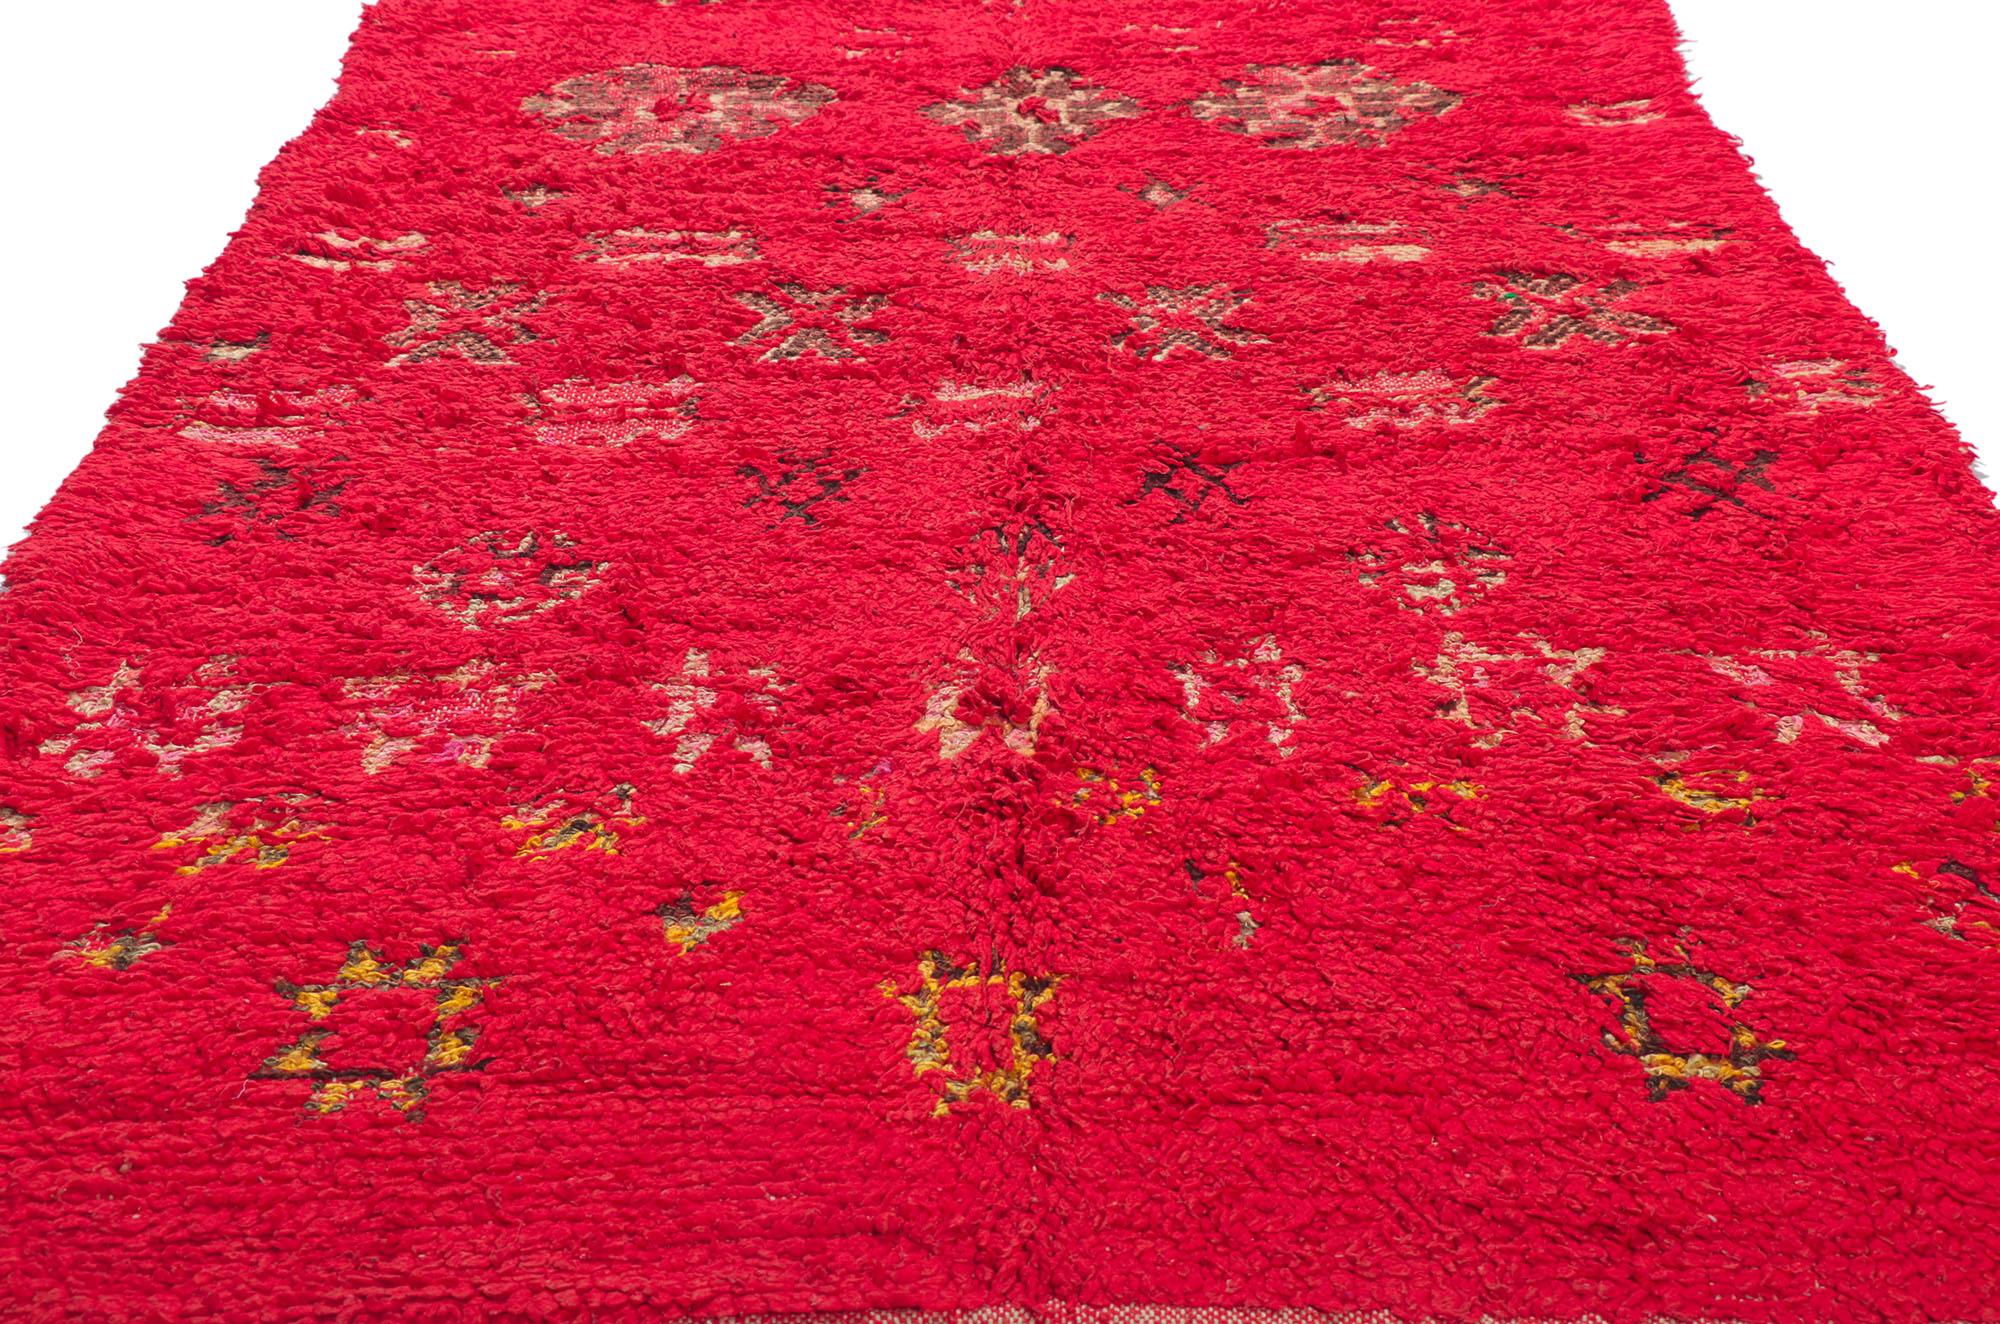 Vintage Red Berber Moroccan Rug with Tribal Style In Good Condition For Sale In Dallas, TX